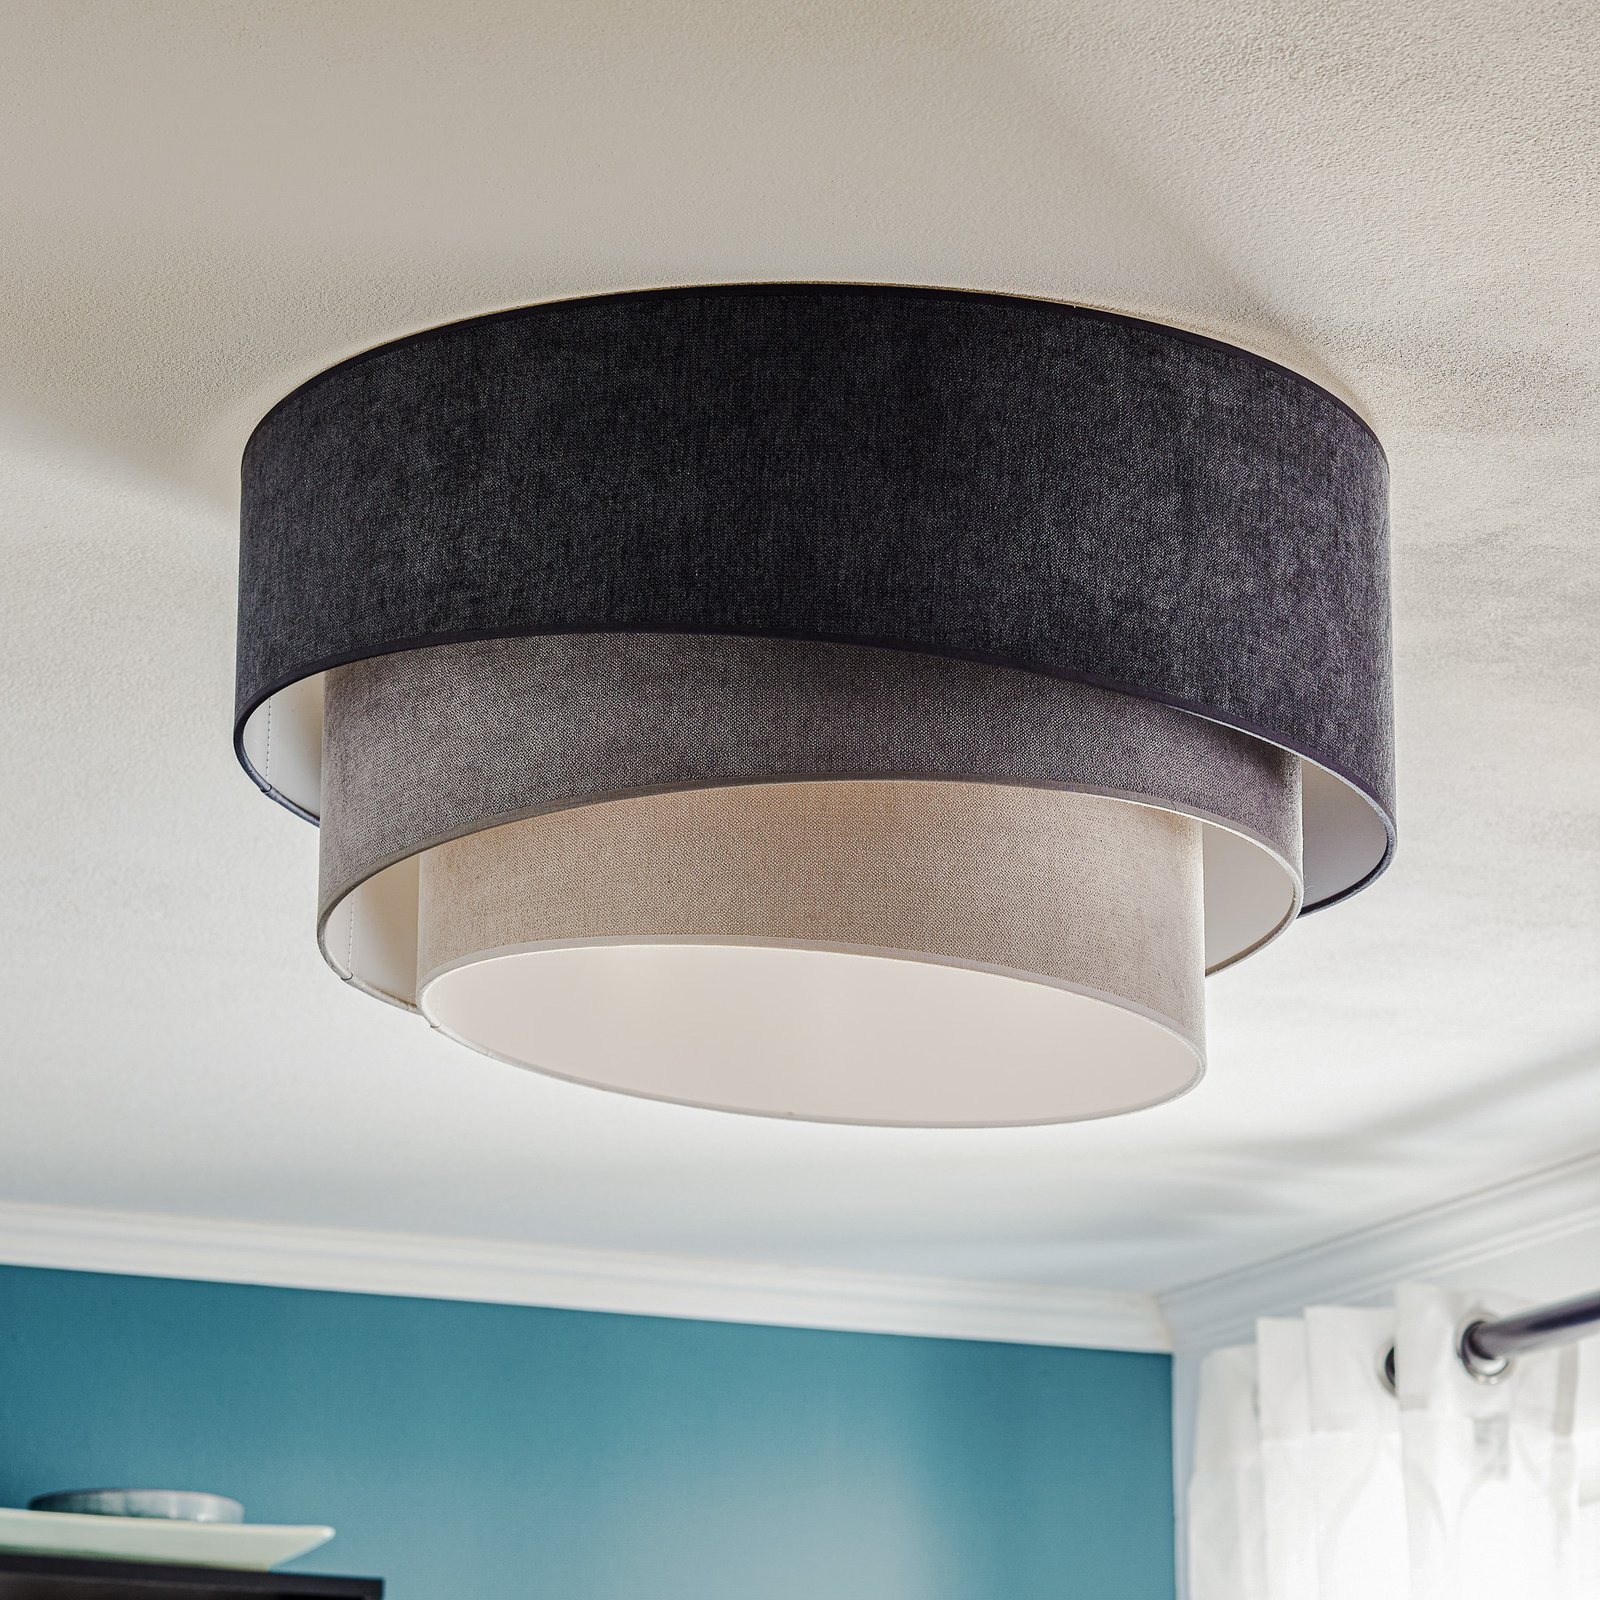 Pastell Trio ceiling lamp Ø 60cm in 3 shades of grey